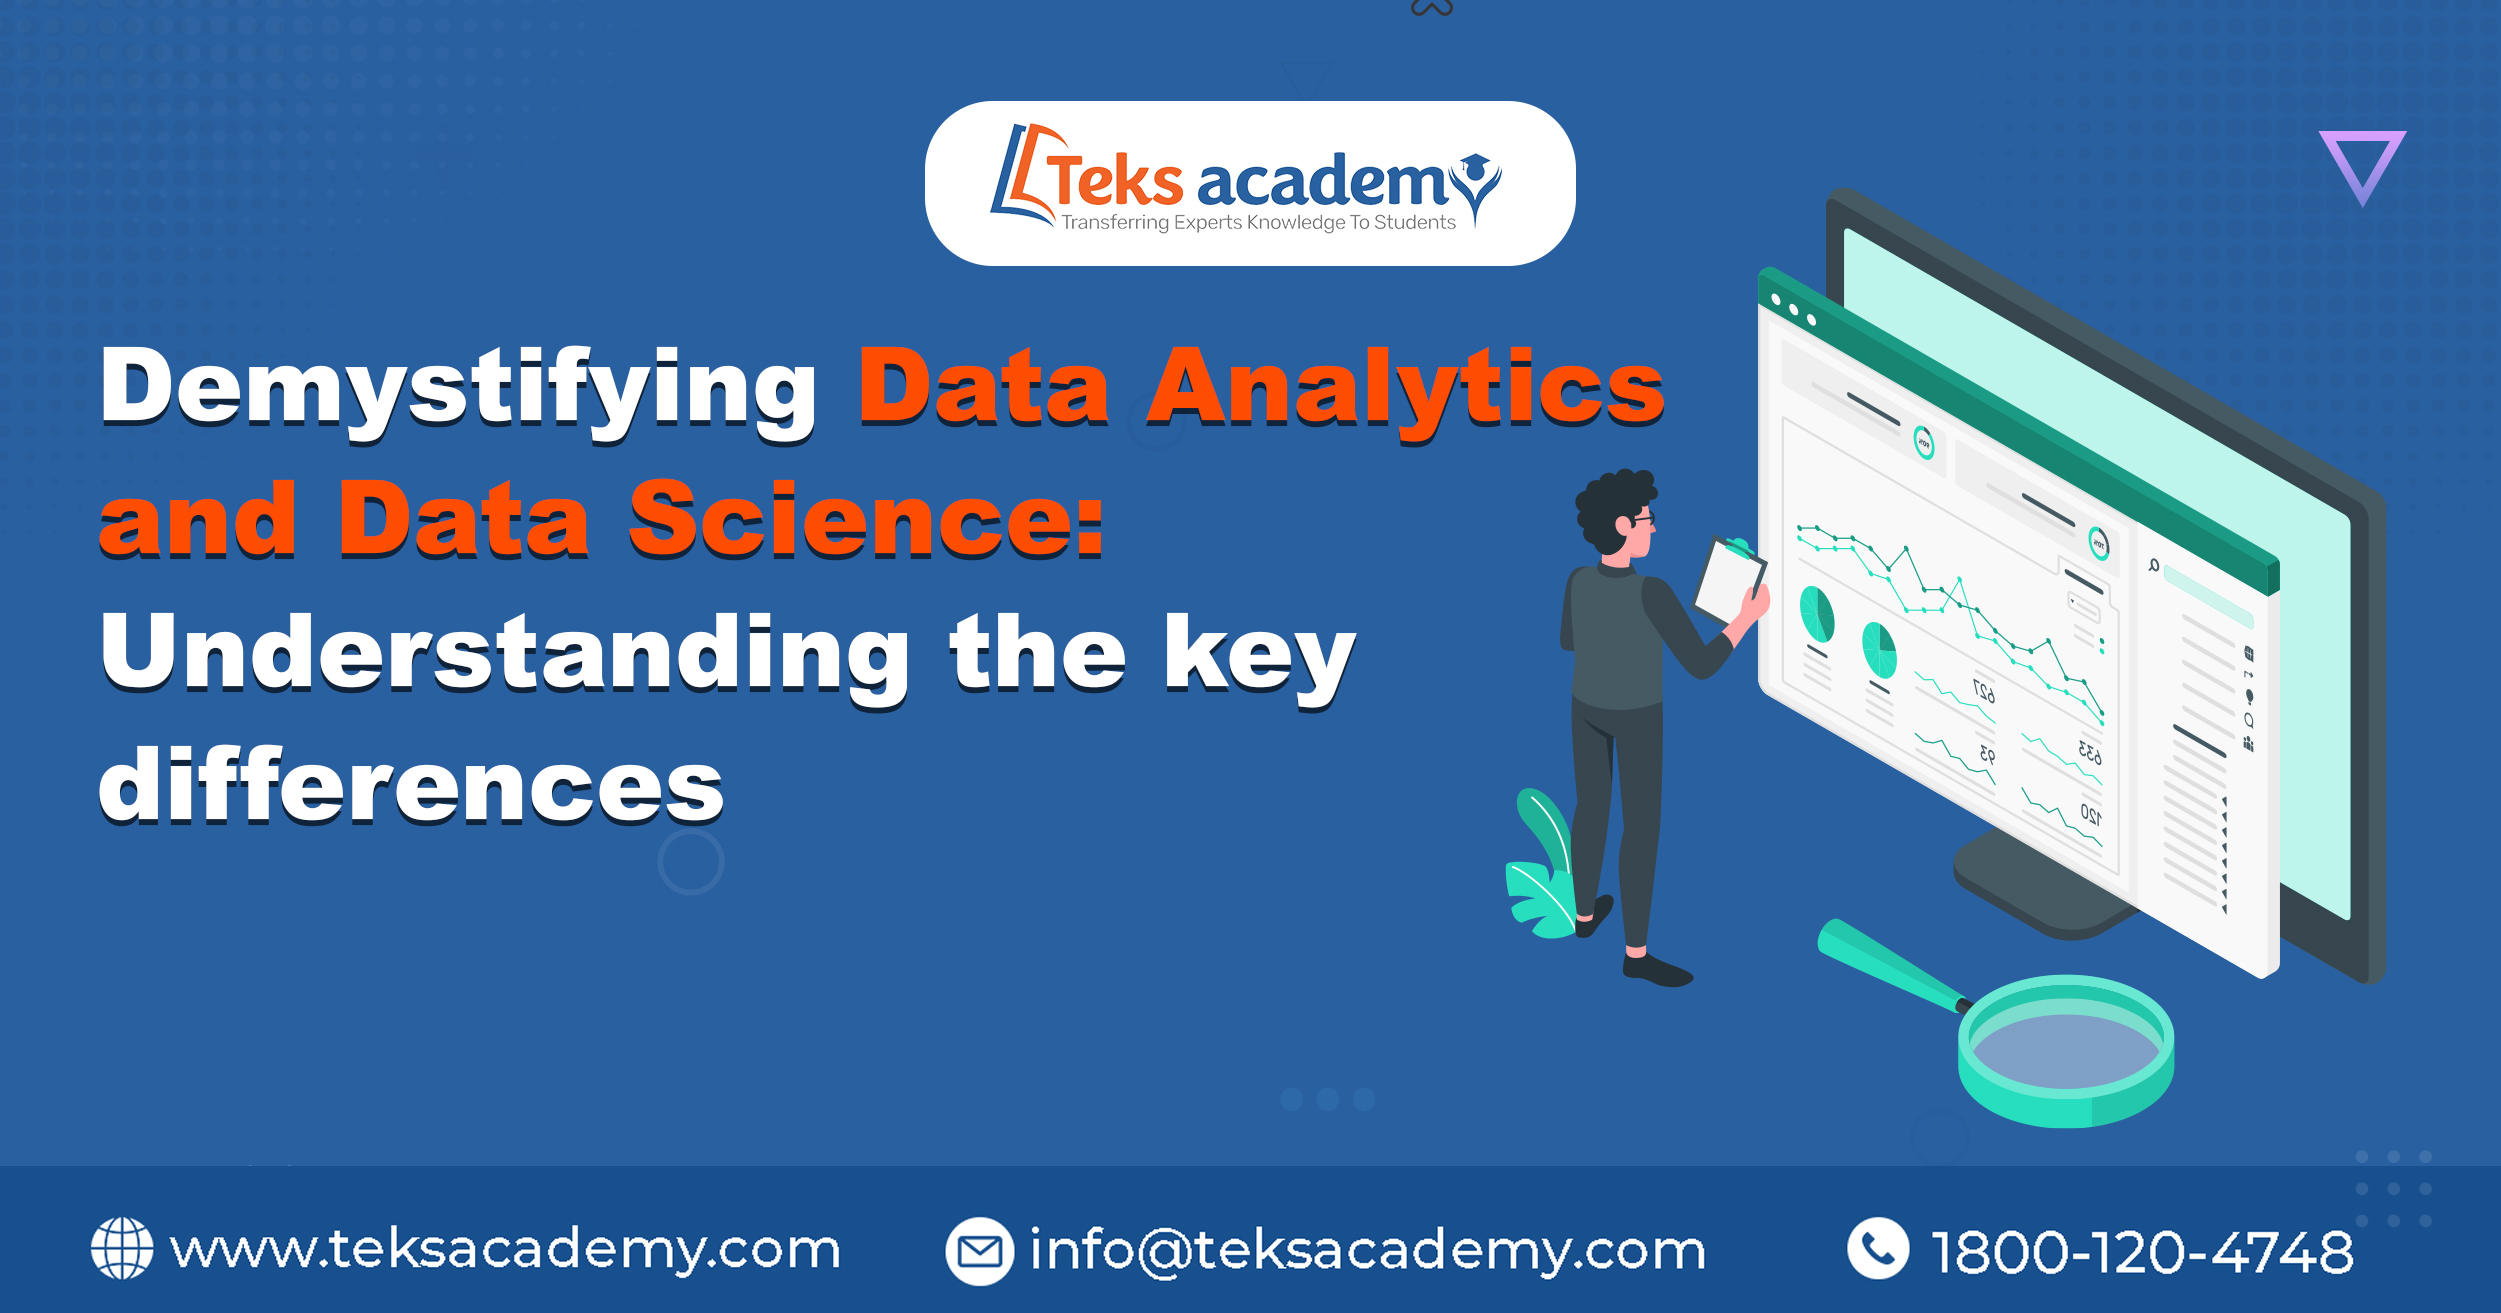 Demystifying Data Science and Data Analytics: Understanding the key differences